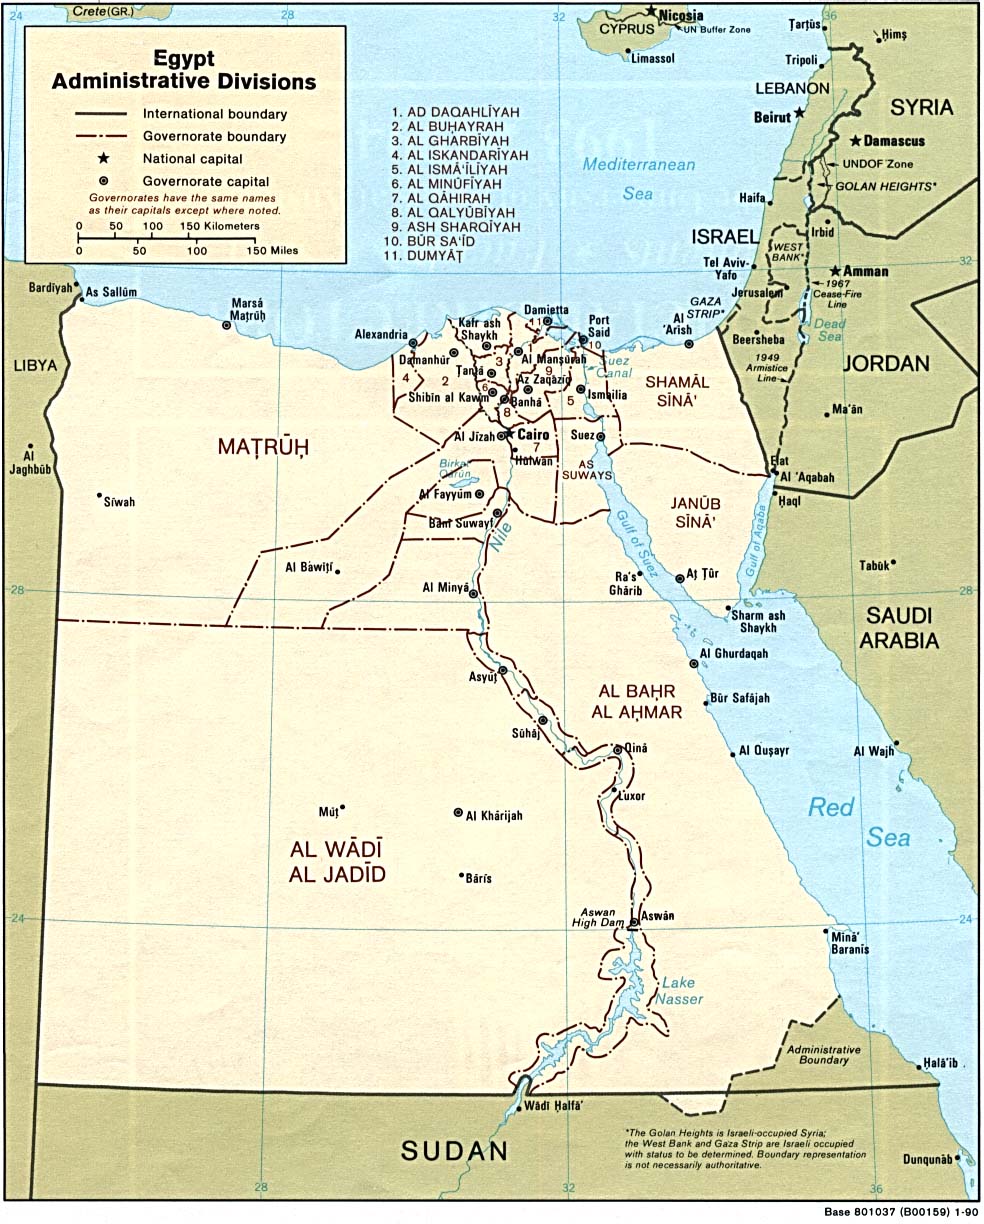 Map Of Egypt Egypt: Administrative Divisions [Political Map] 1990 (229K) 